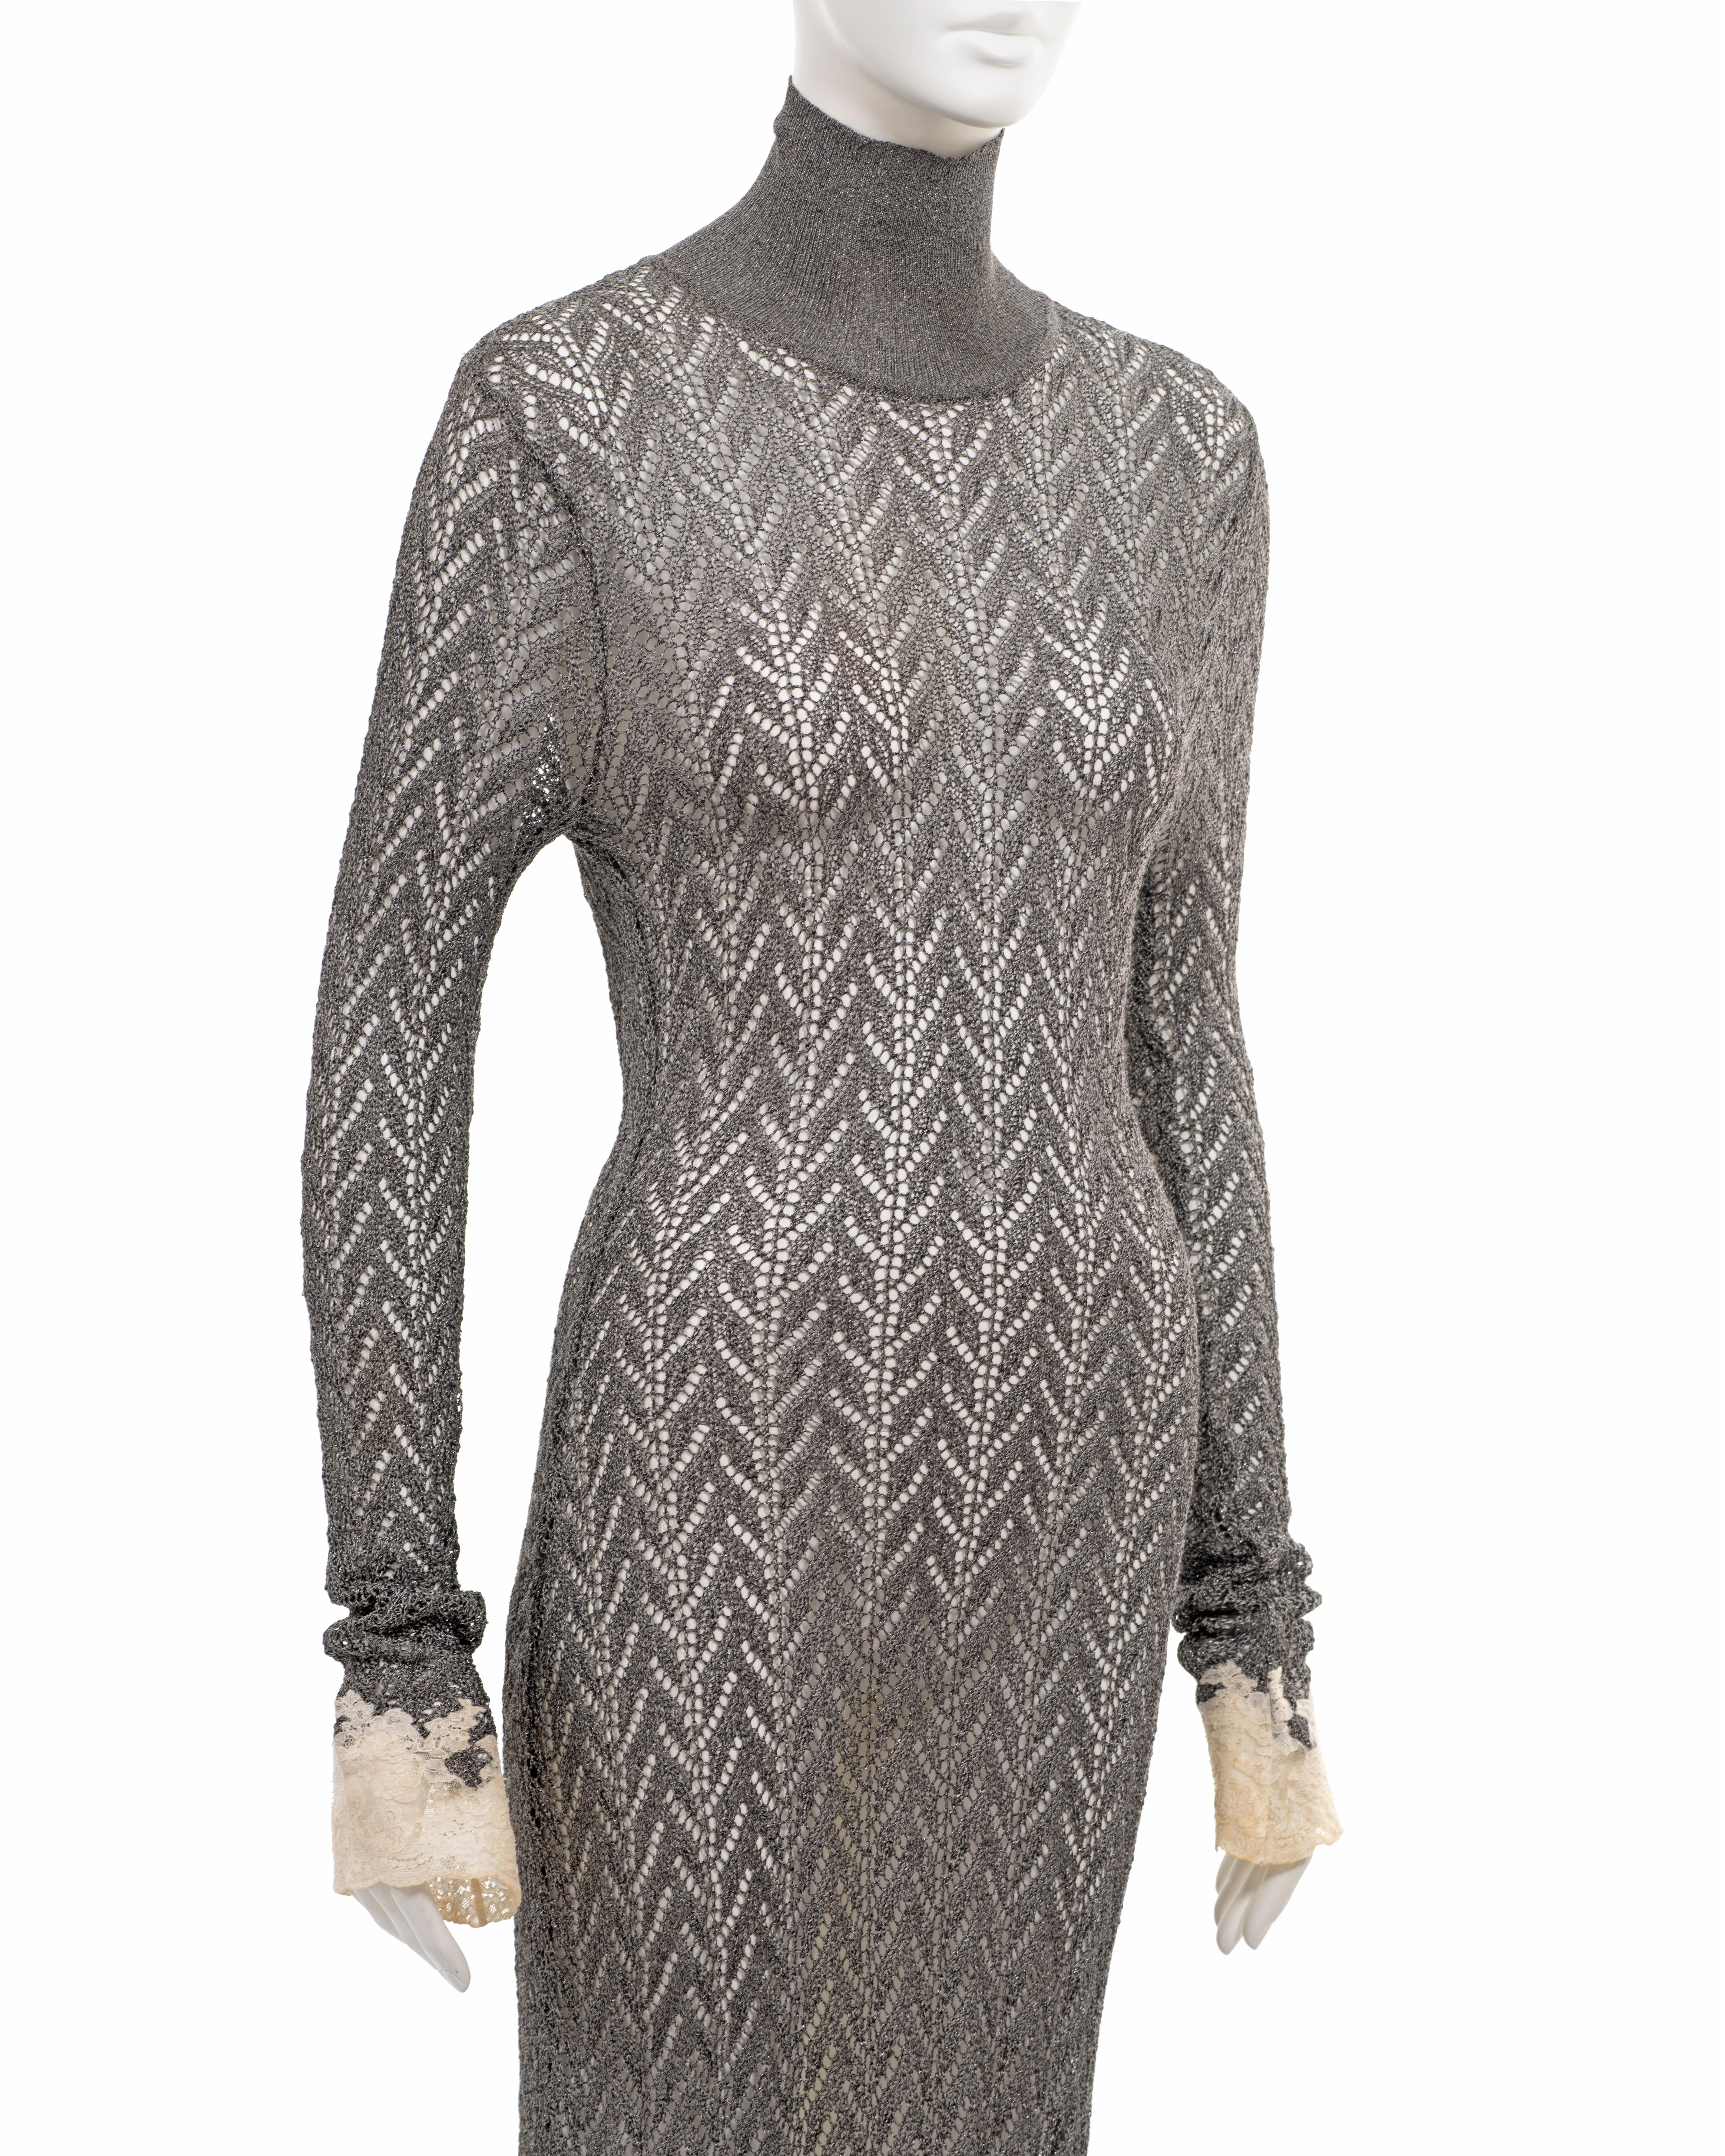 Christian Dior by John Galliano silver open-knit dress with lace trim, fw 1998 For Sale 7